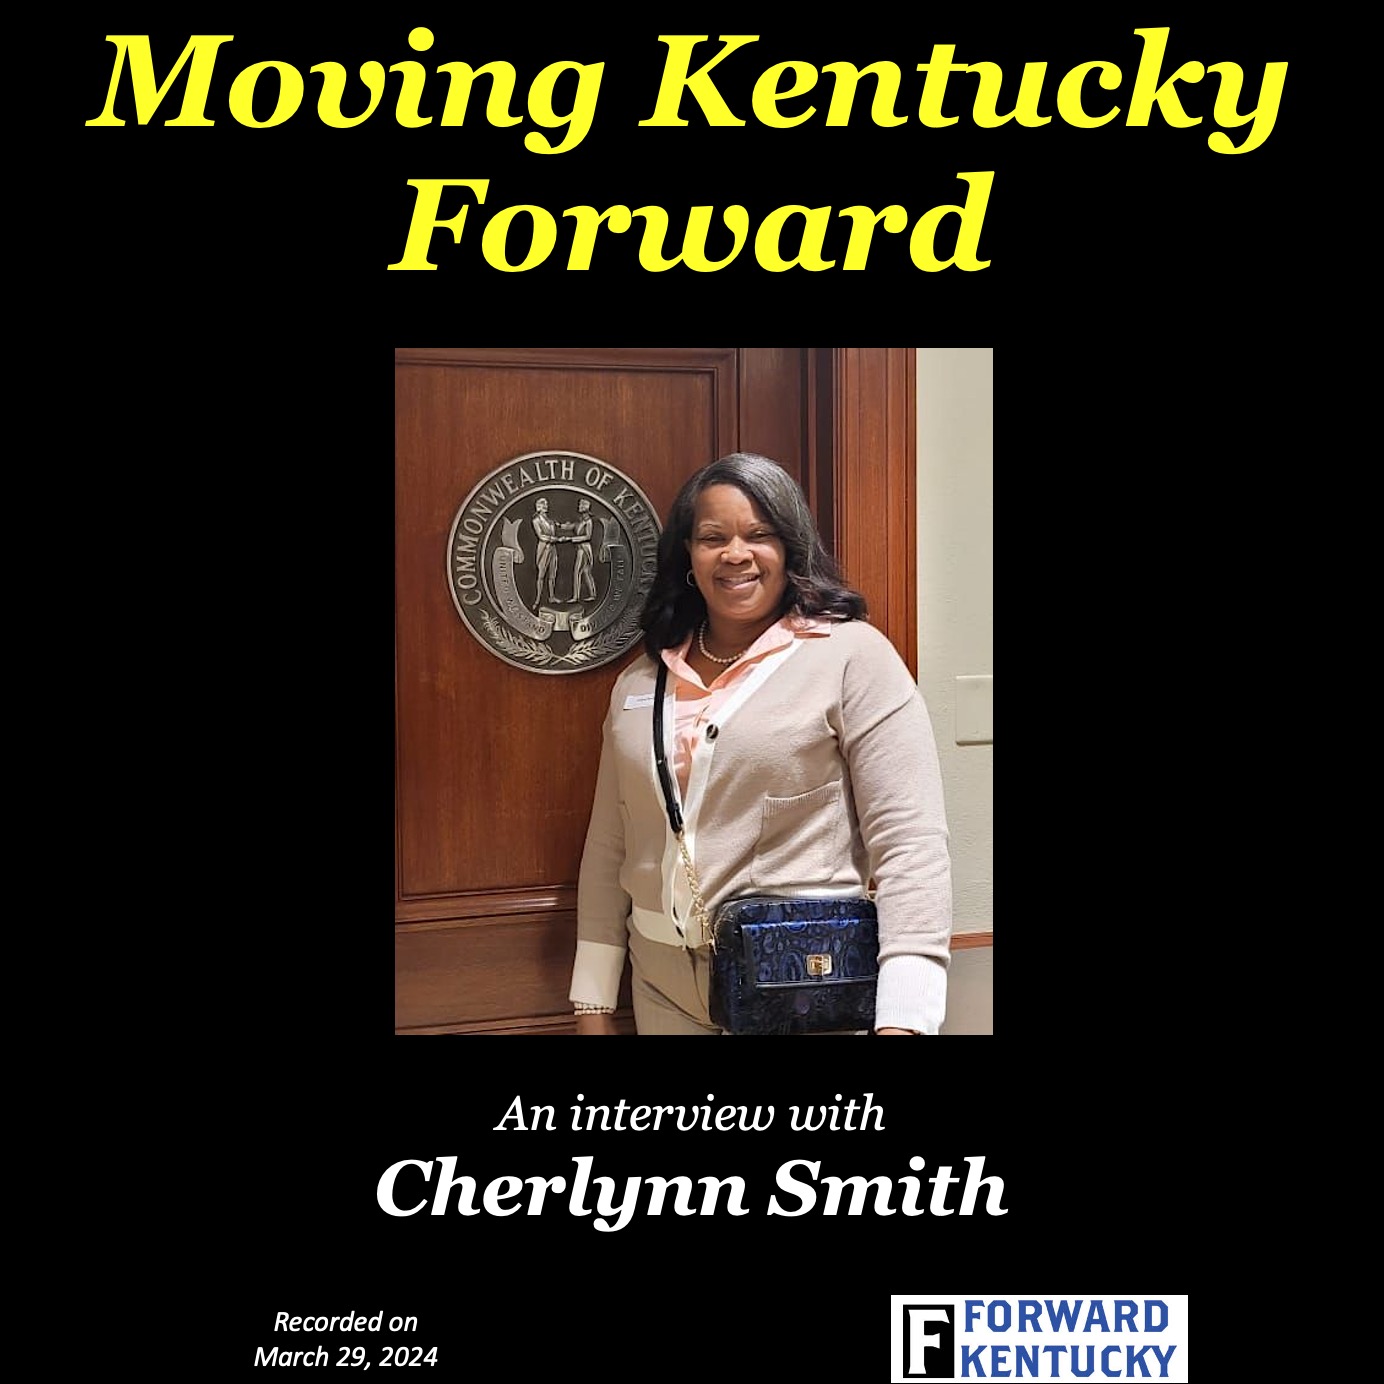 An interview with Cherlyn Smith